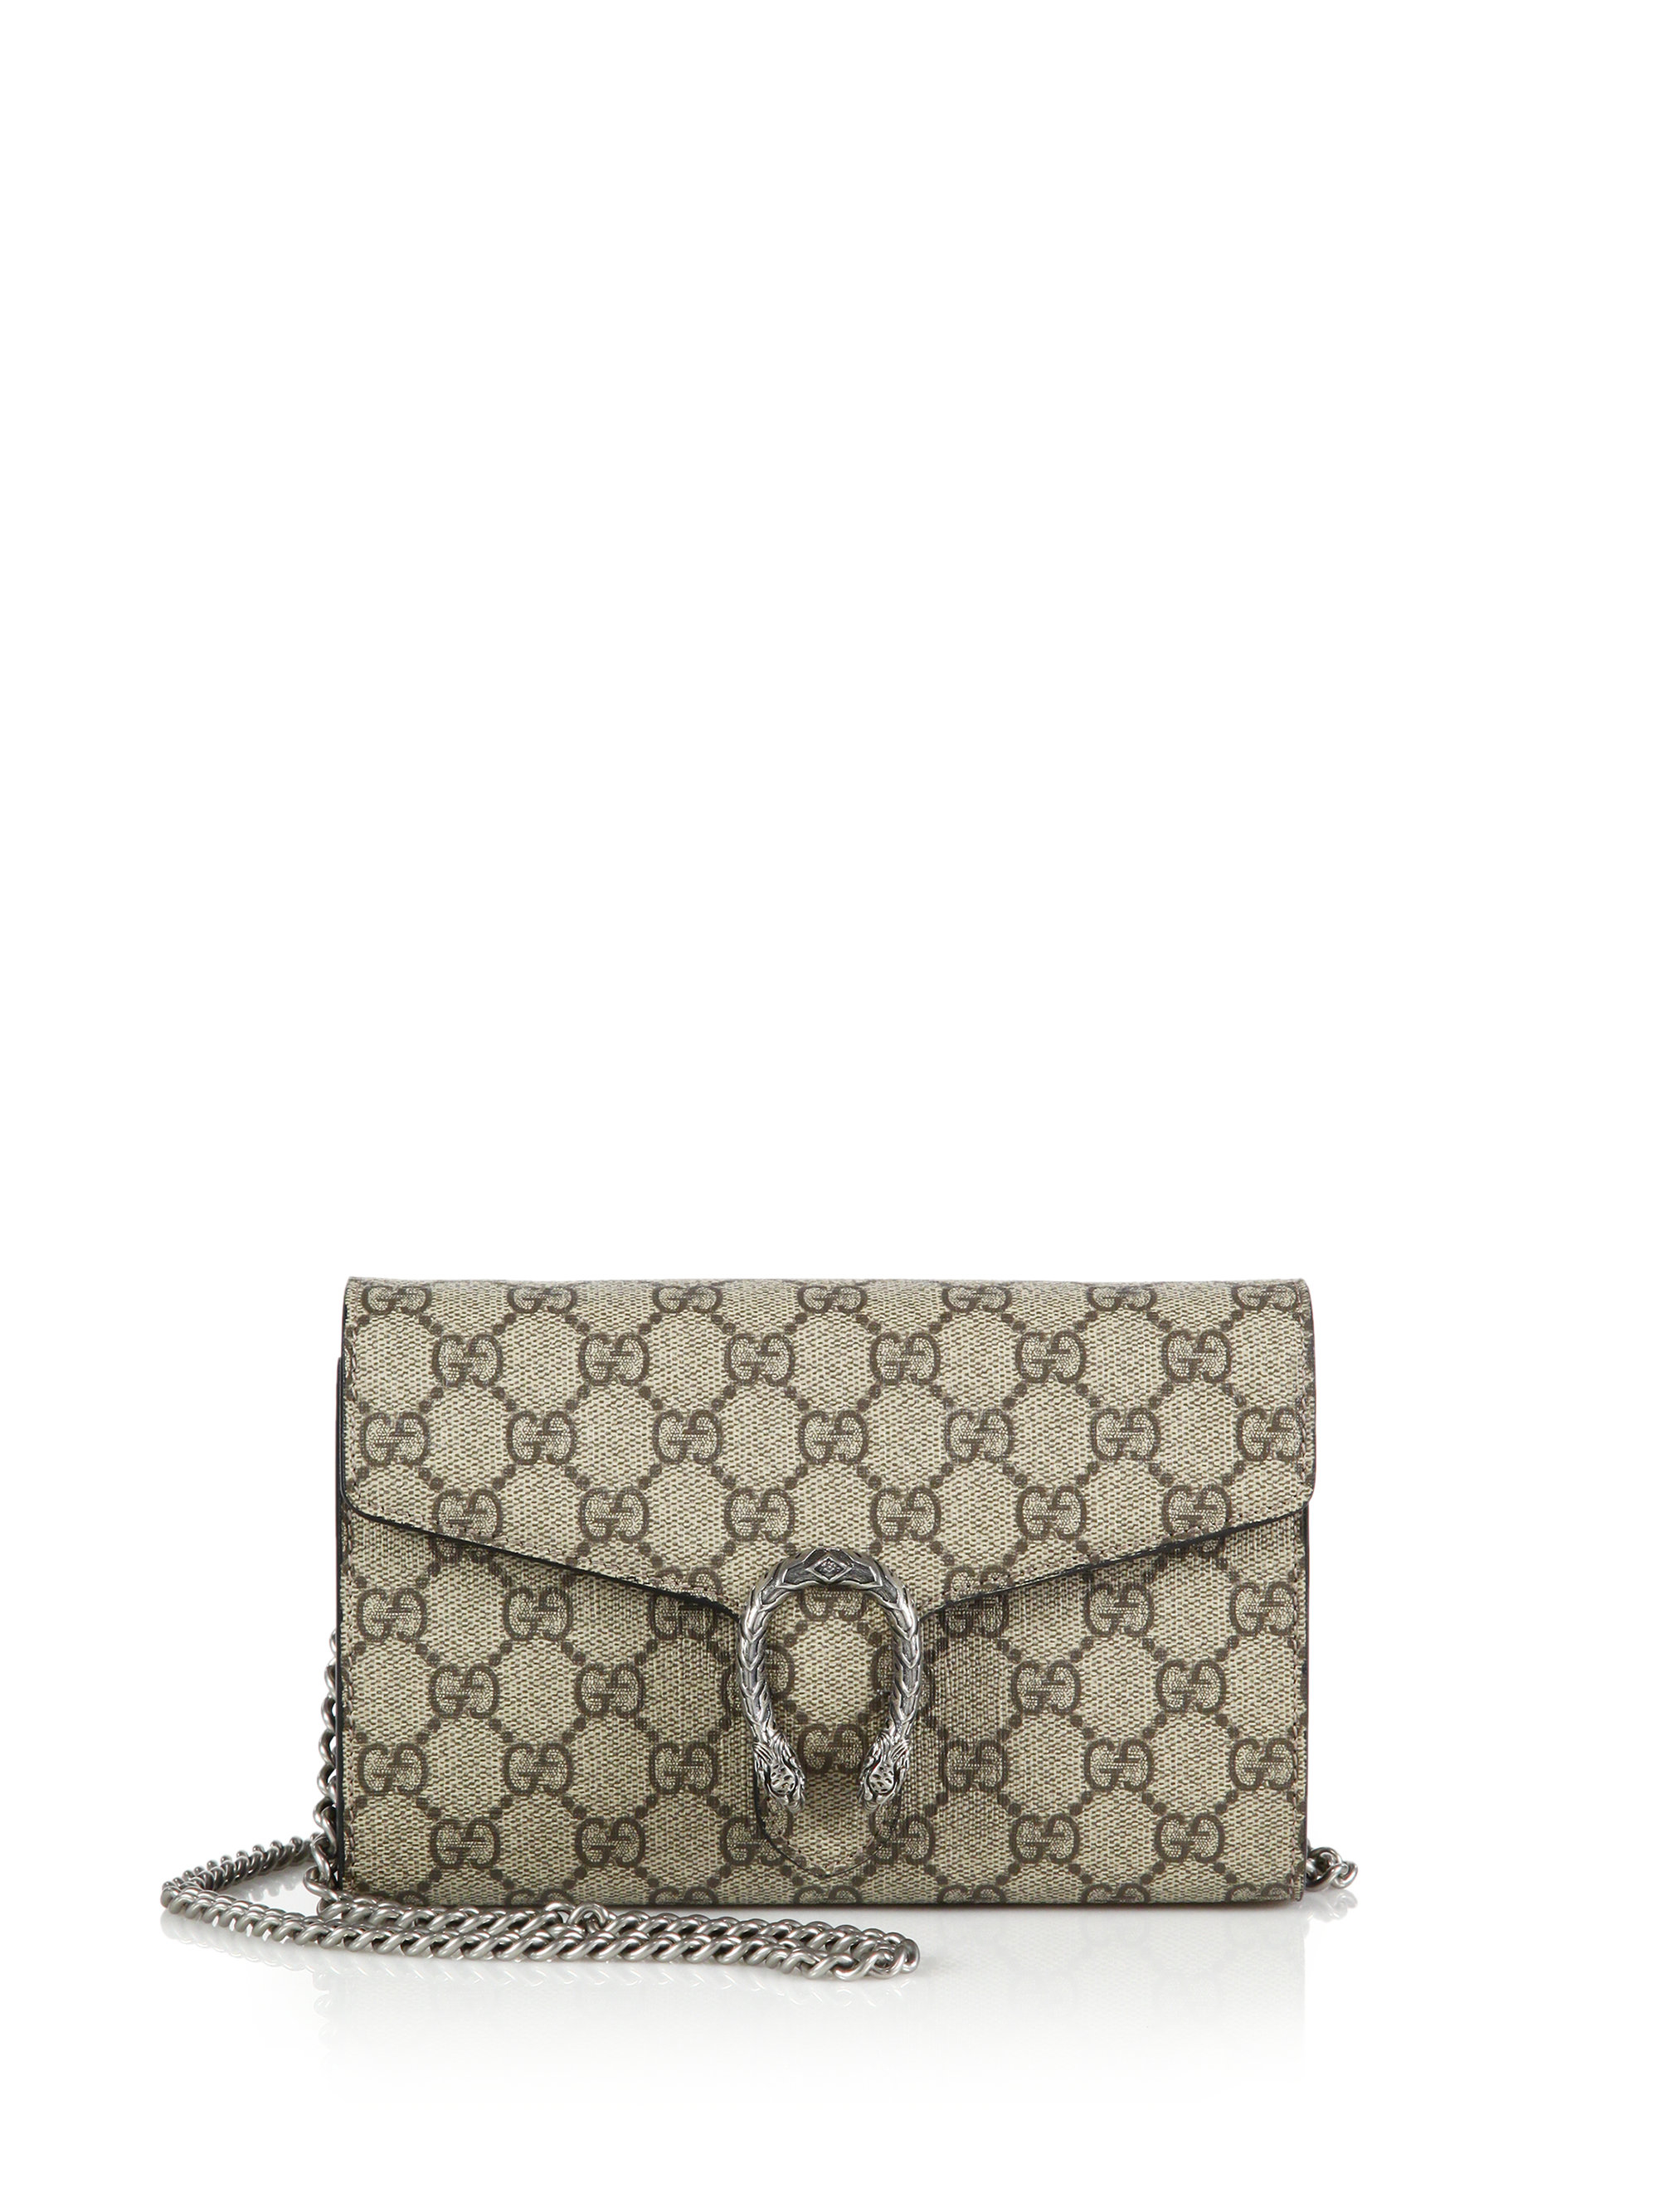 Lyst - Gucci Dionysus Coated Canvas Chain-strap Wallet in Natural